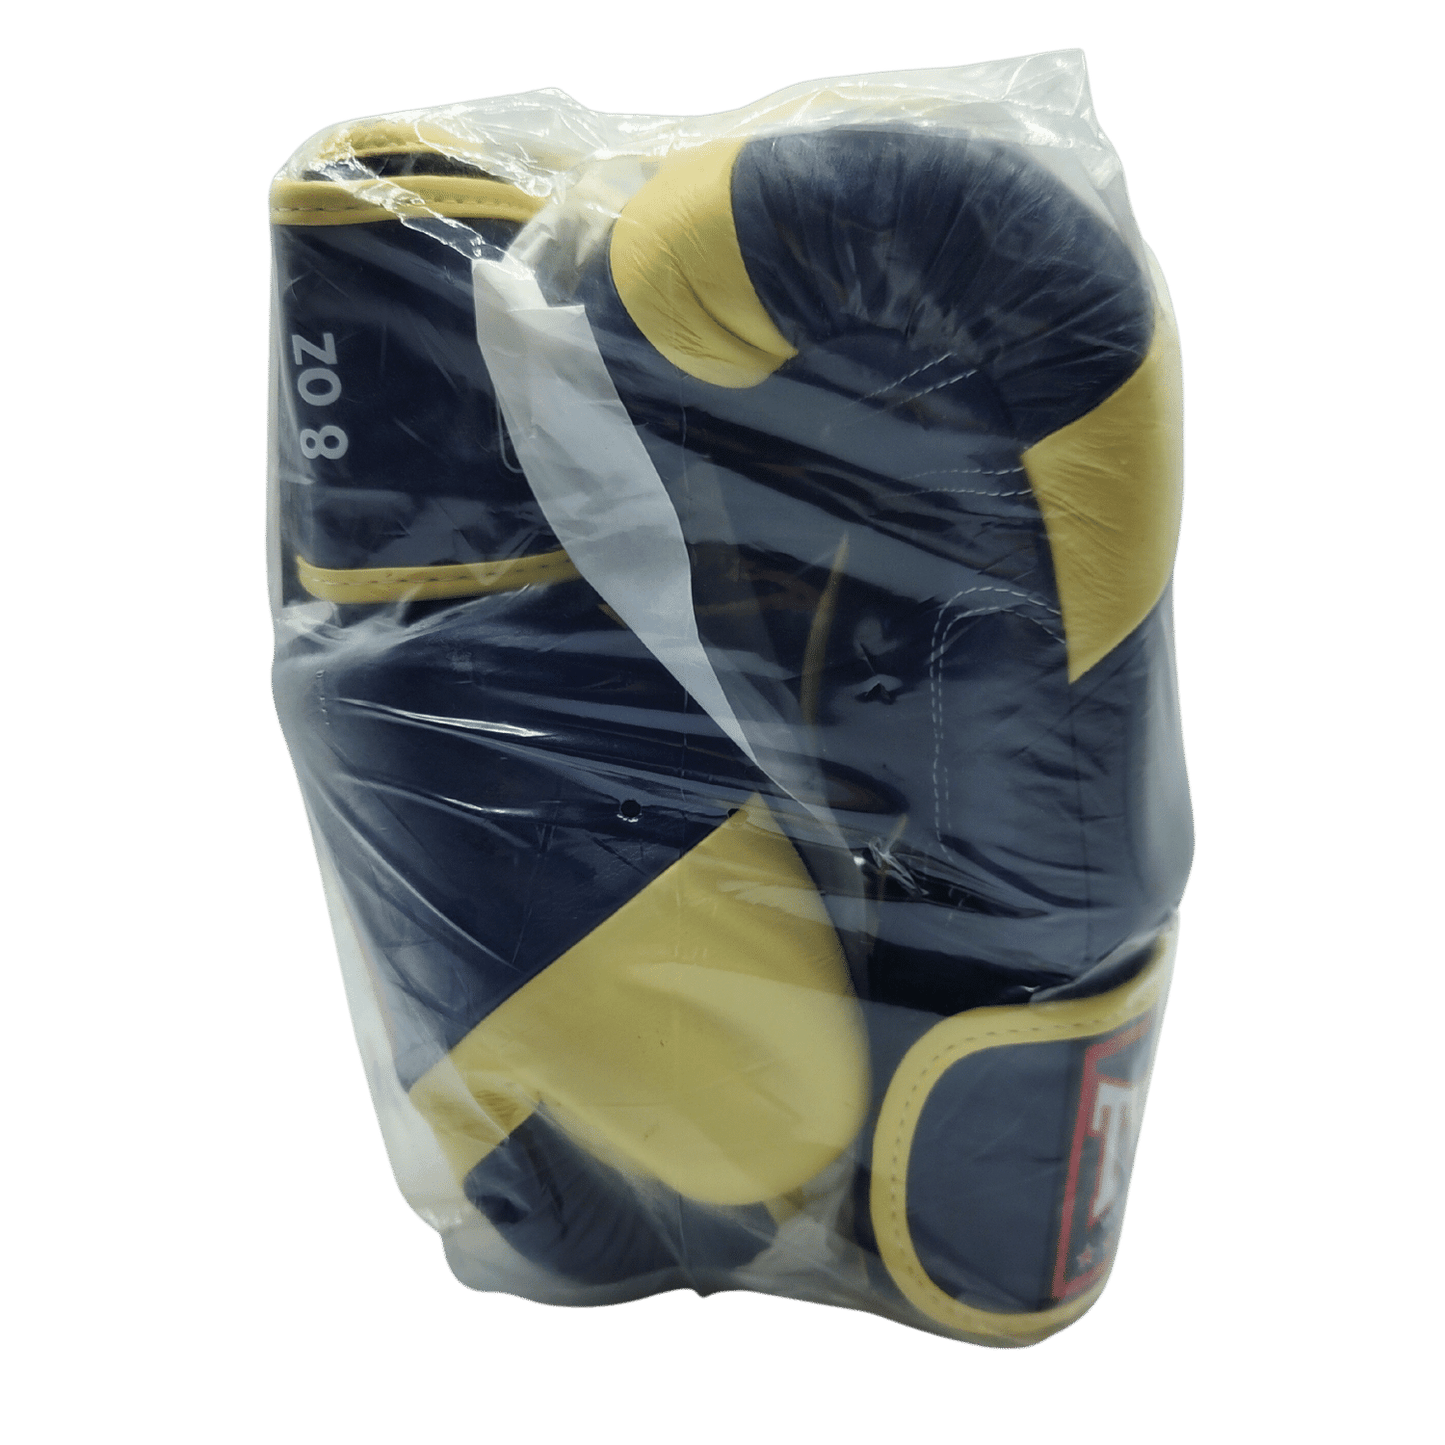 Twins Duo Colour 8oz Boxing Gloves - Cream & Navy by Twins in a plastic bag.